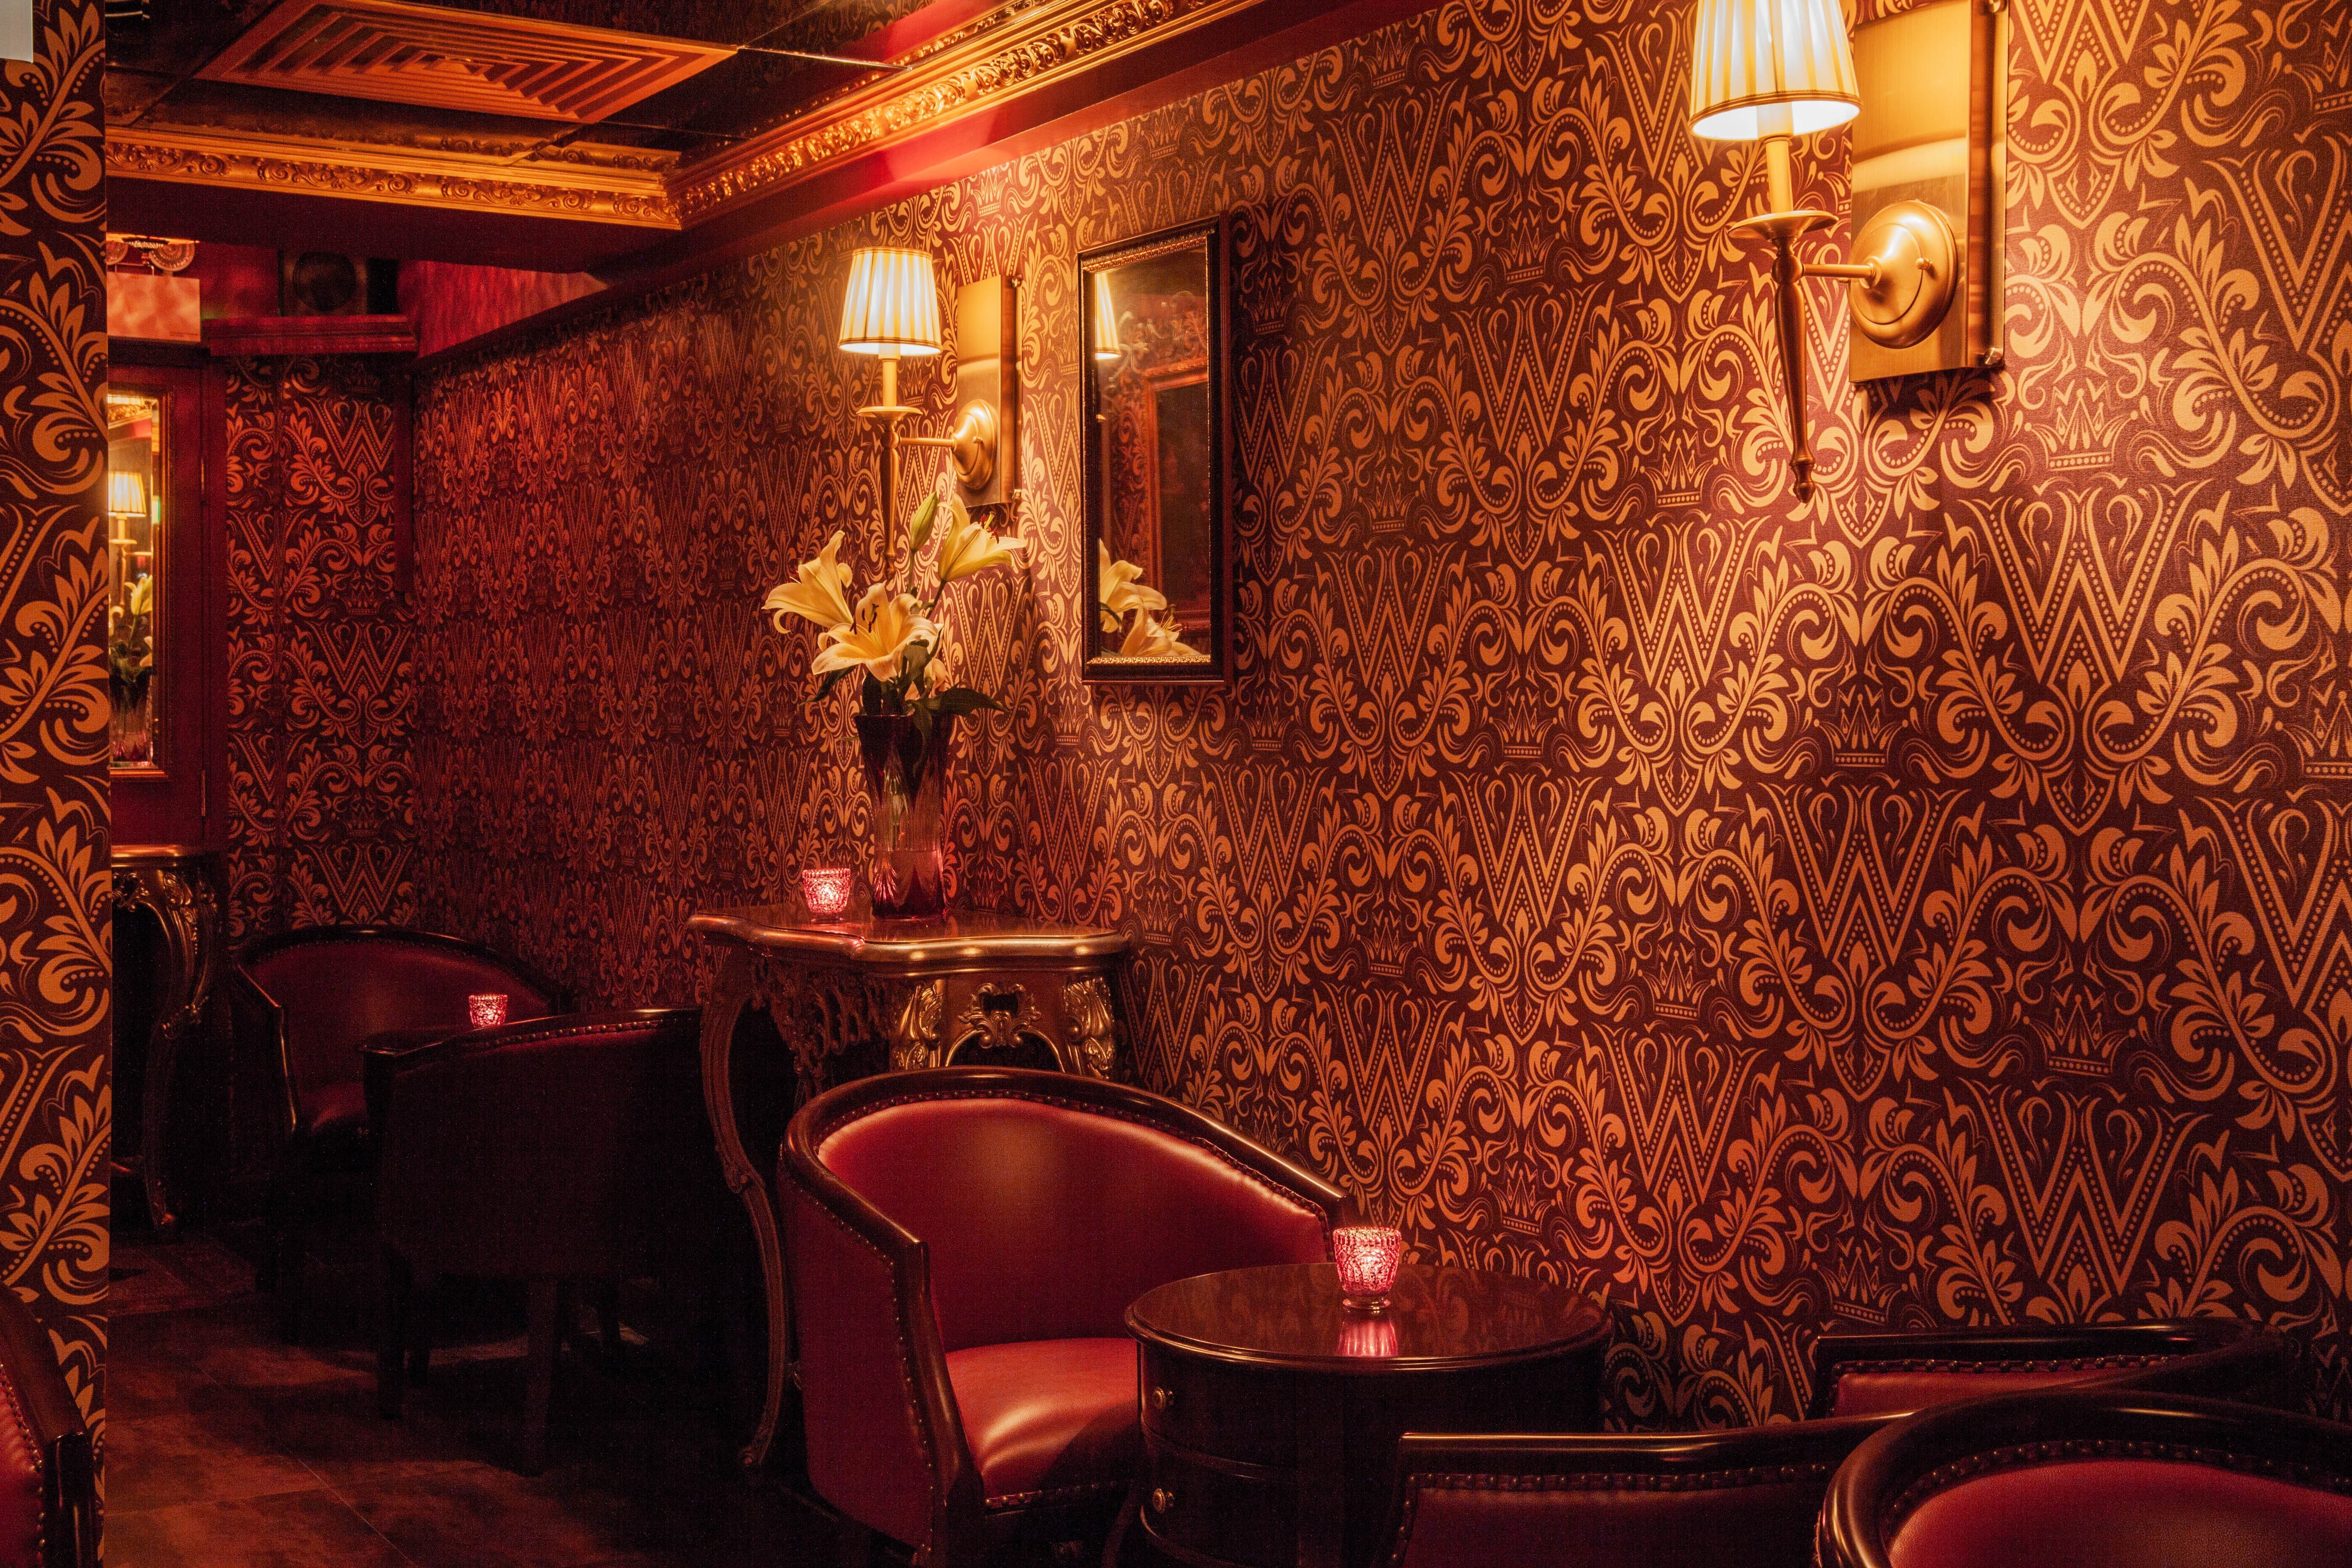 The Wise King has a dimly-lit interior with a vintage design.